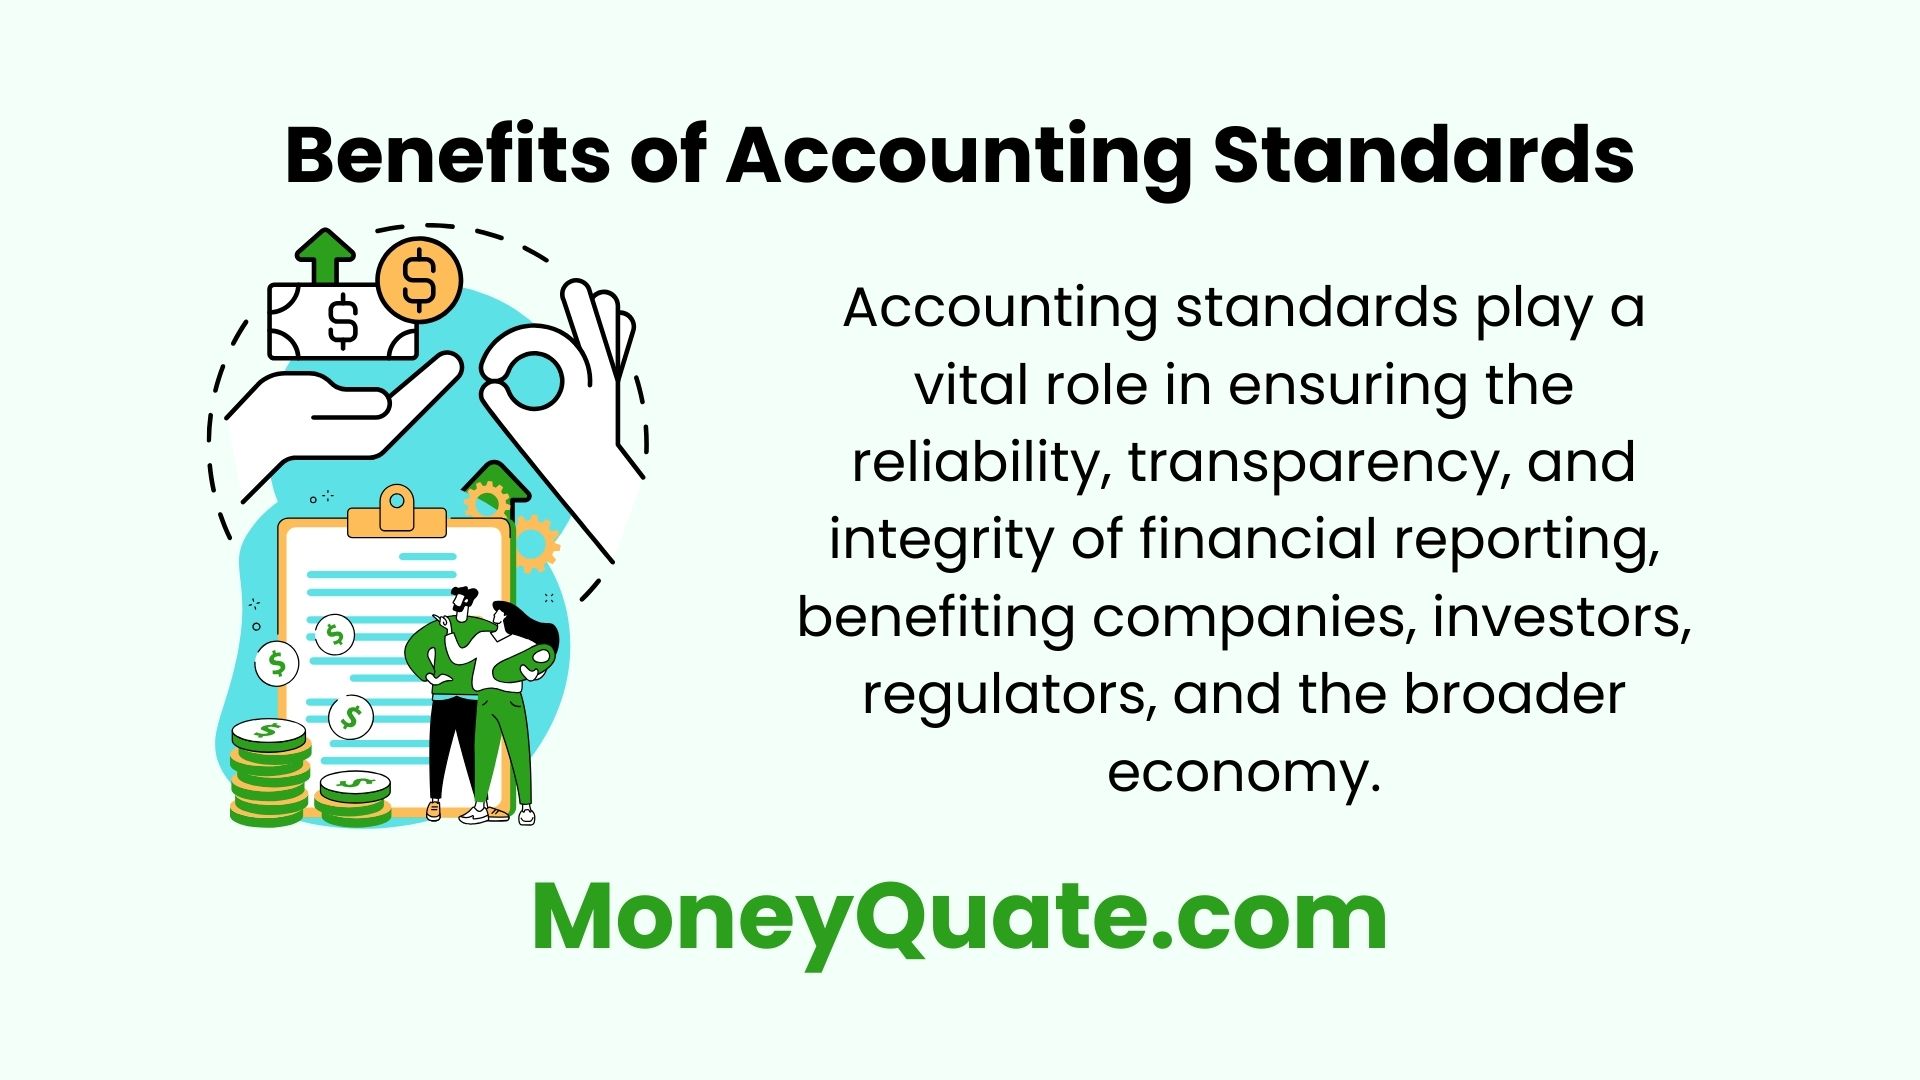 Benefits of Accounting Standards